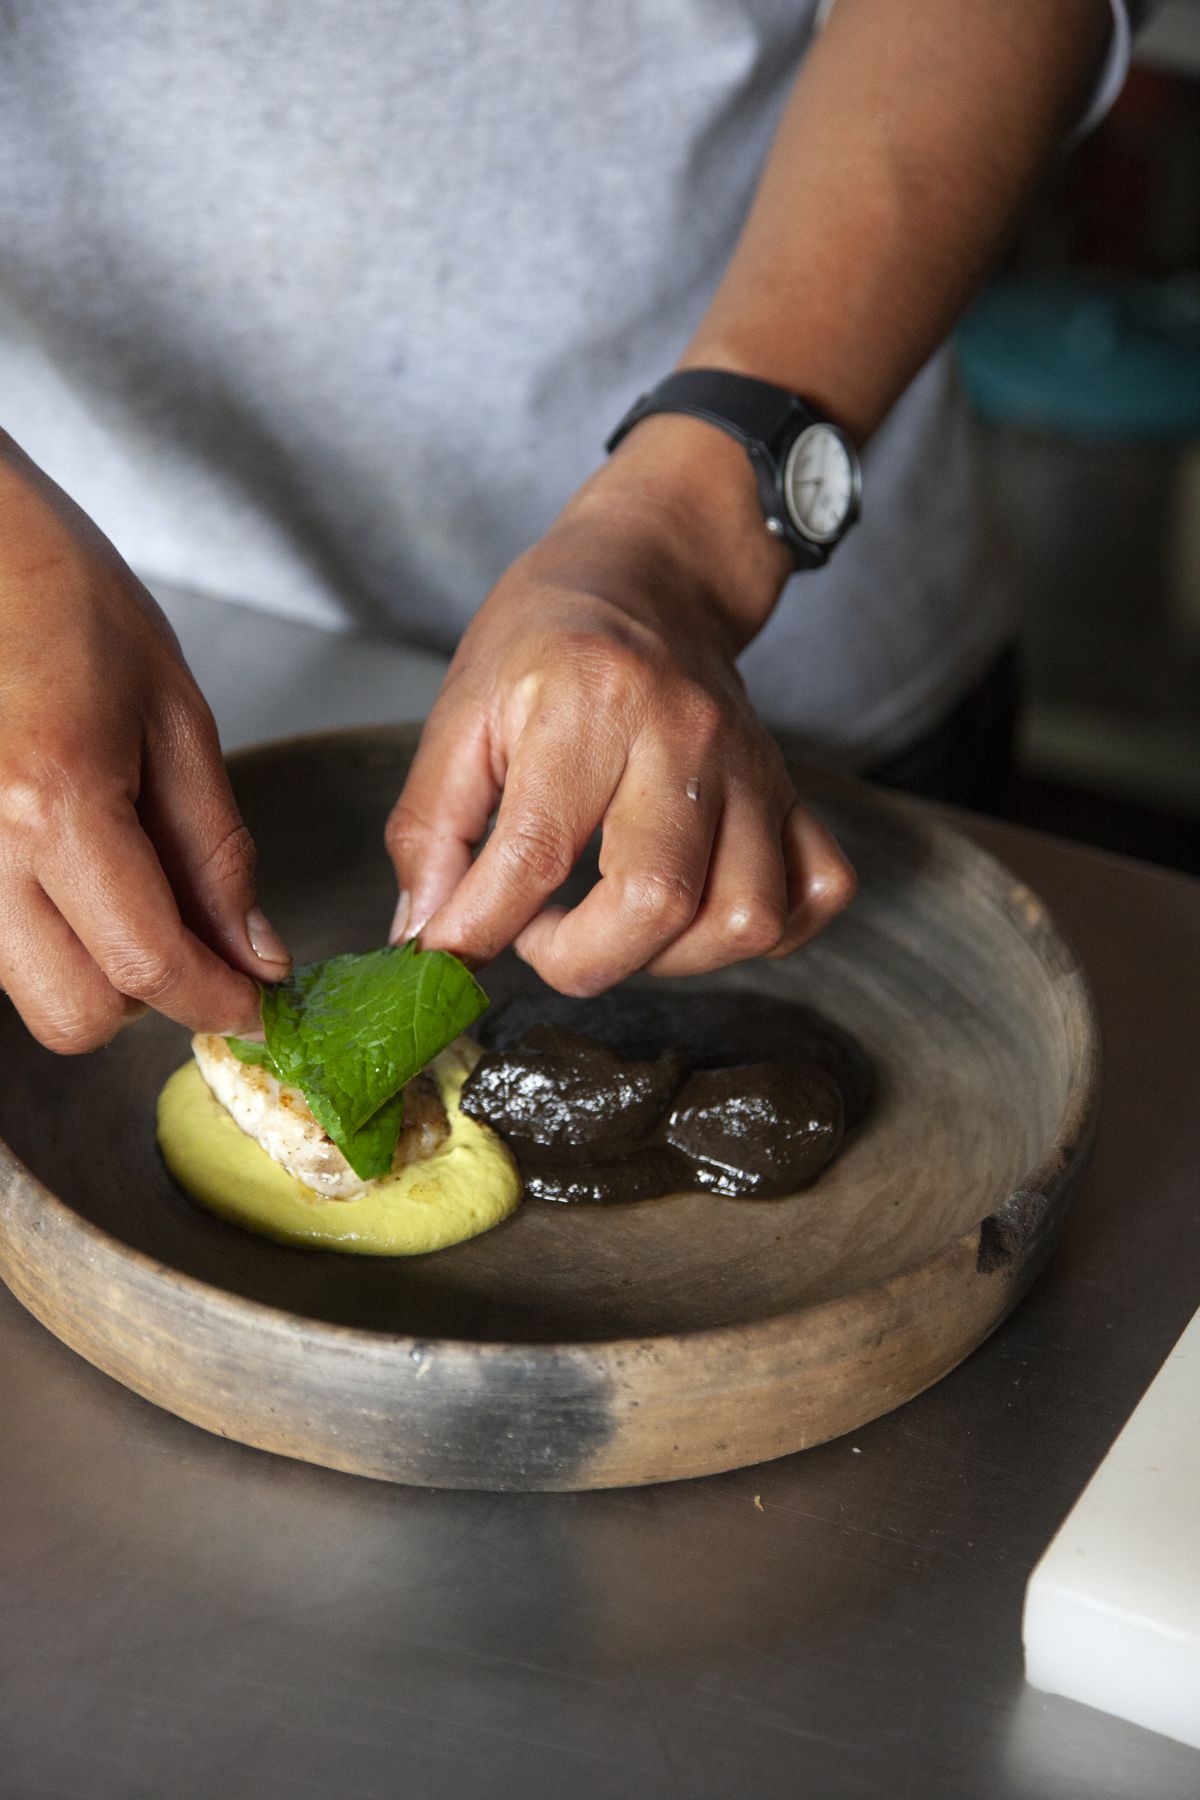 One bright green mole on a plate alongside a dark brown mole. Two hands place a piece of fish and leaf on top.